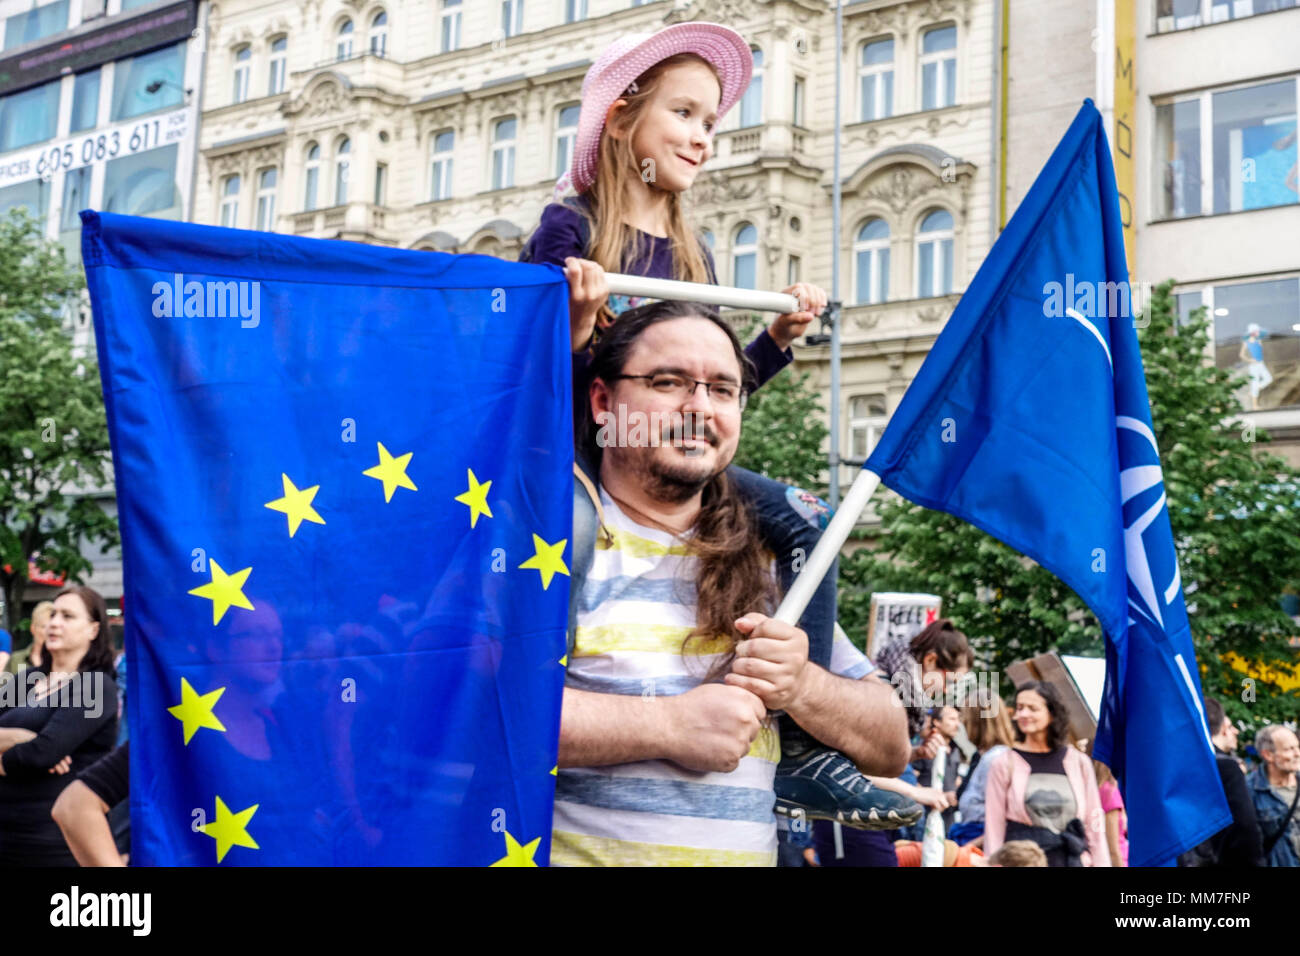 Prague Demonstration against Prime Minister Babis, President Zeman and the Communists, Czech Supporters with EU European Union flag people Man Father Child Girl Stock Photo